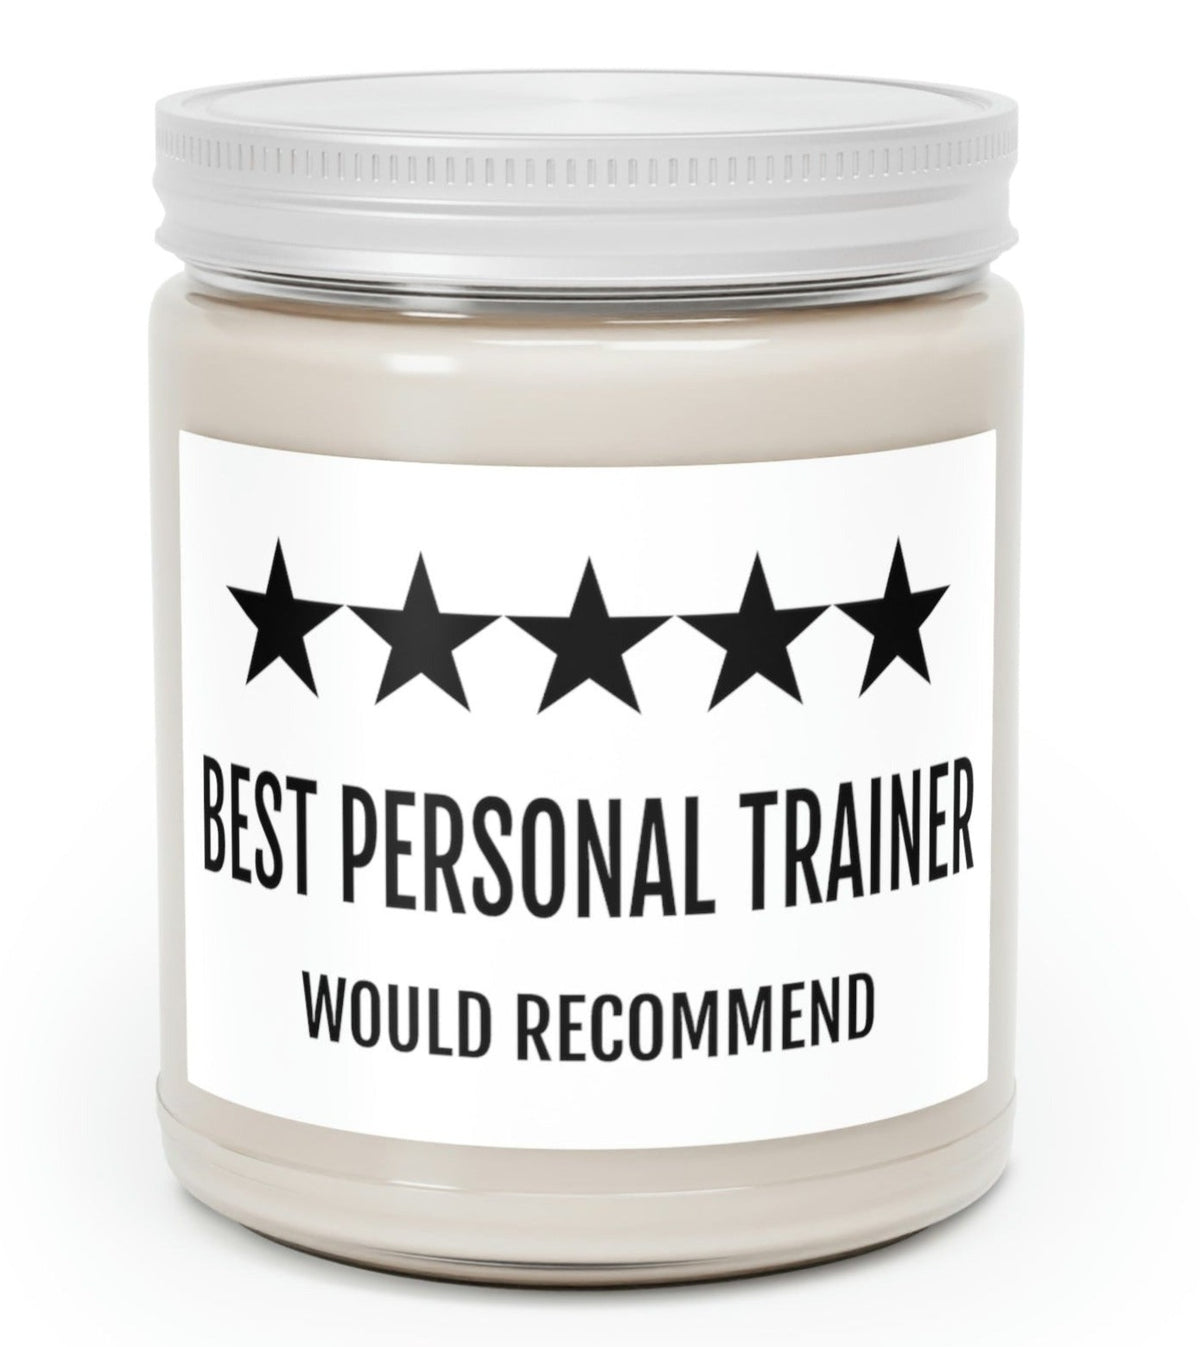 Best Personal Trainer Candle - Would Recommend